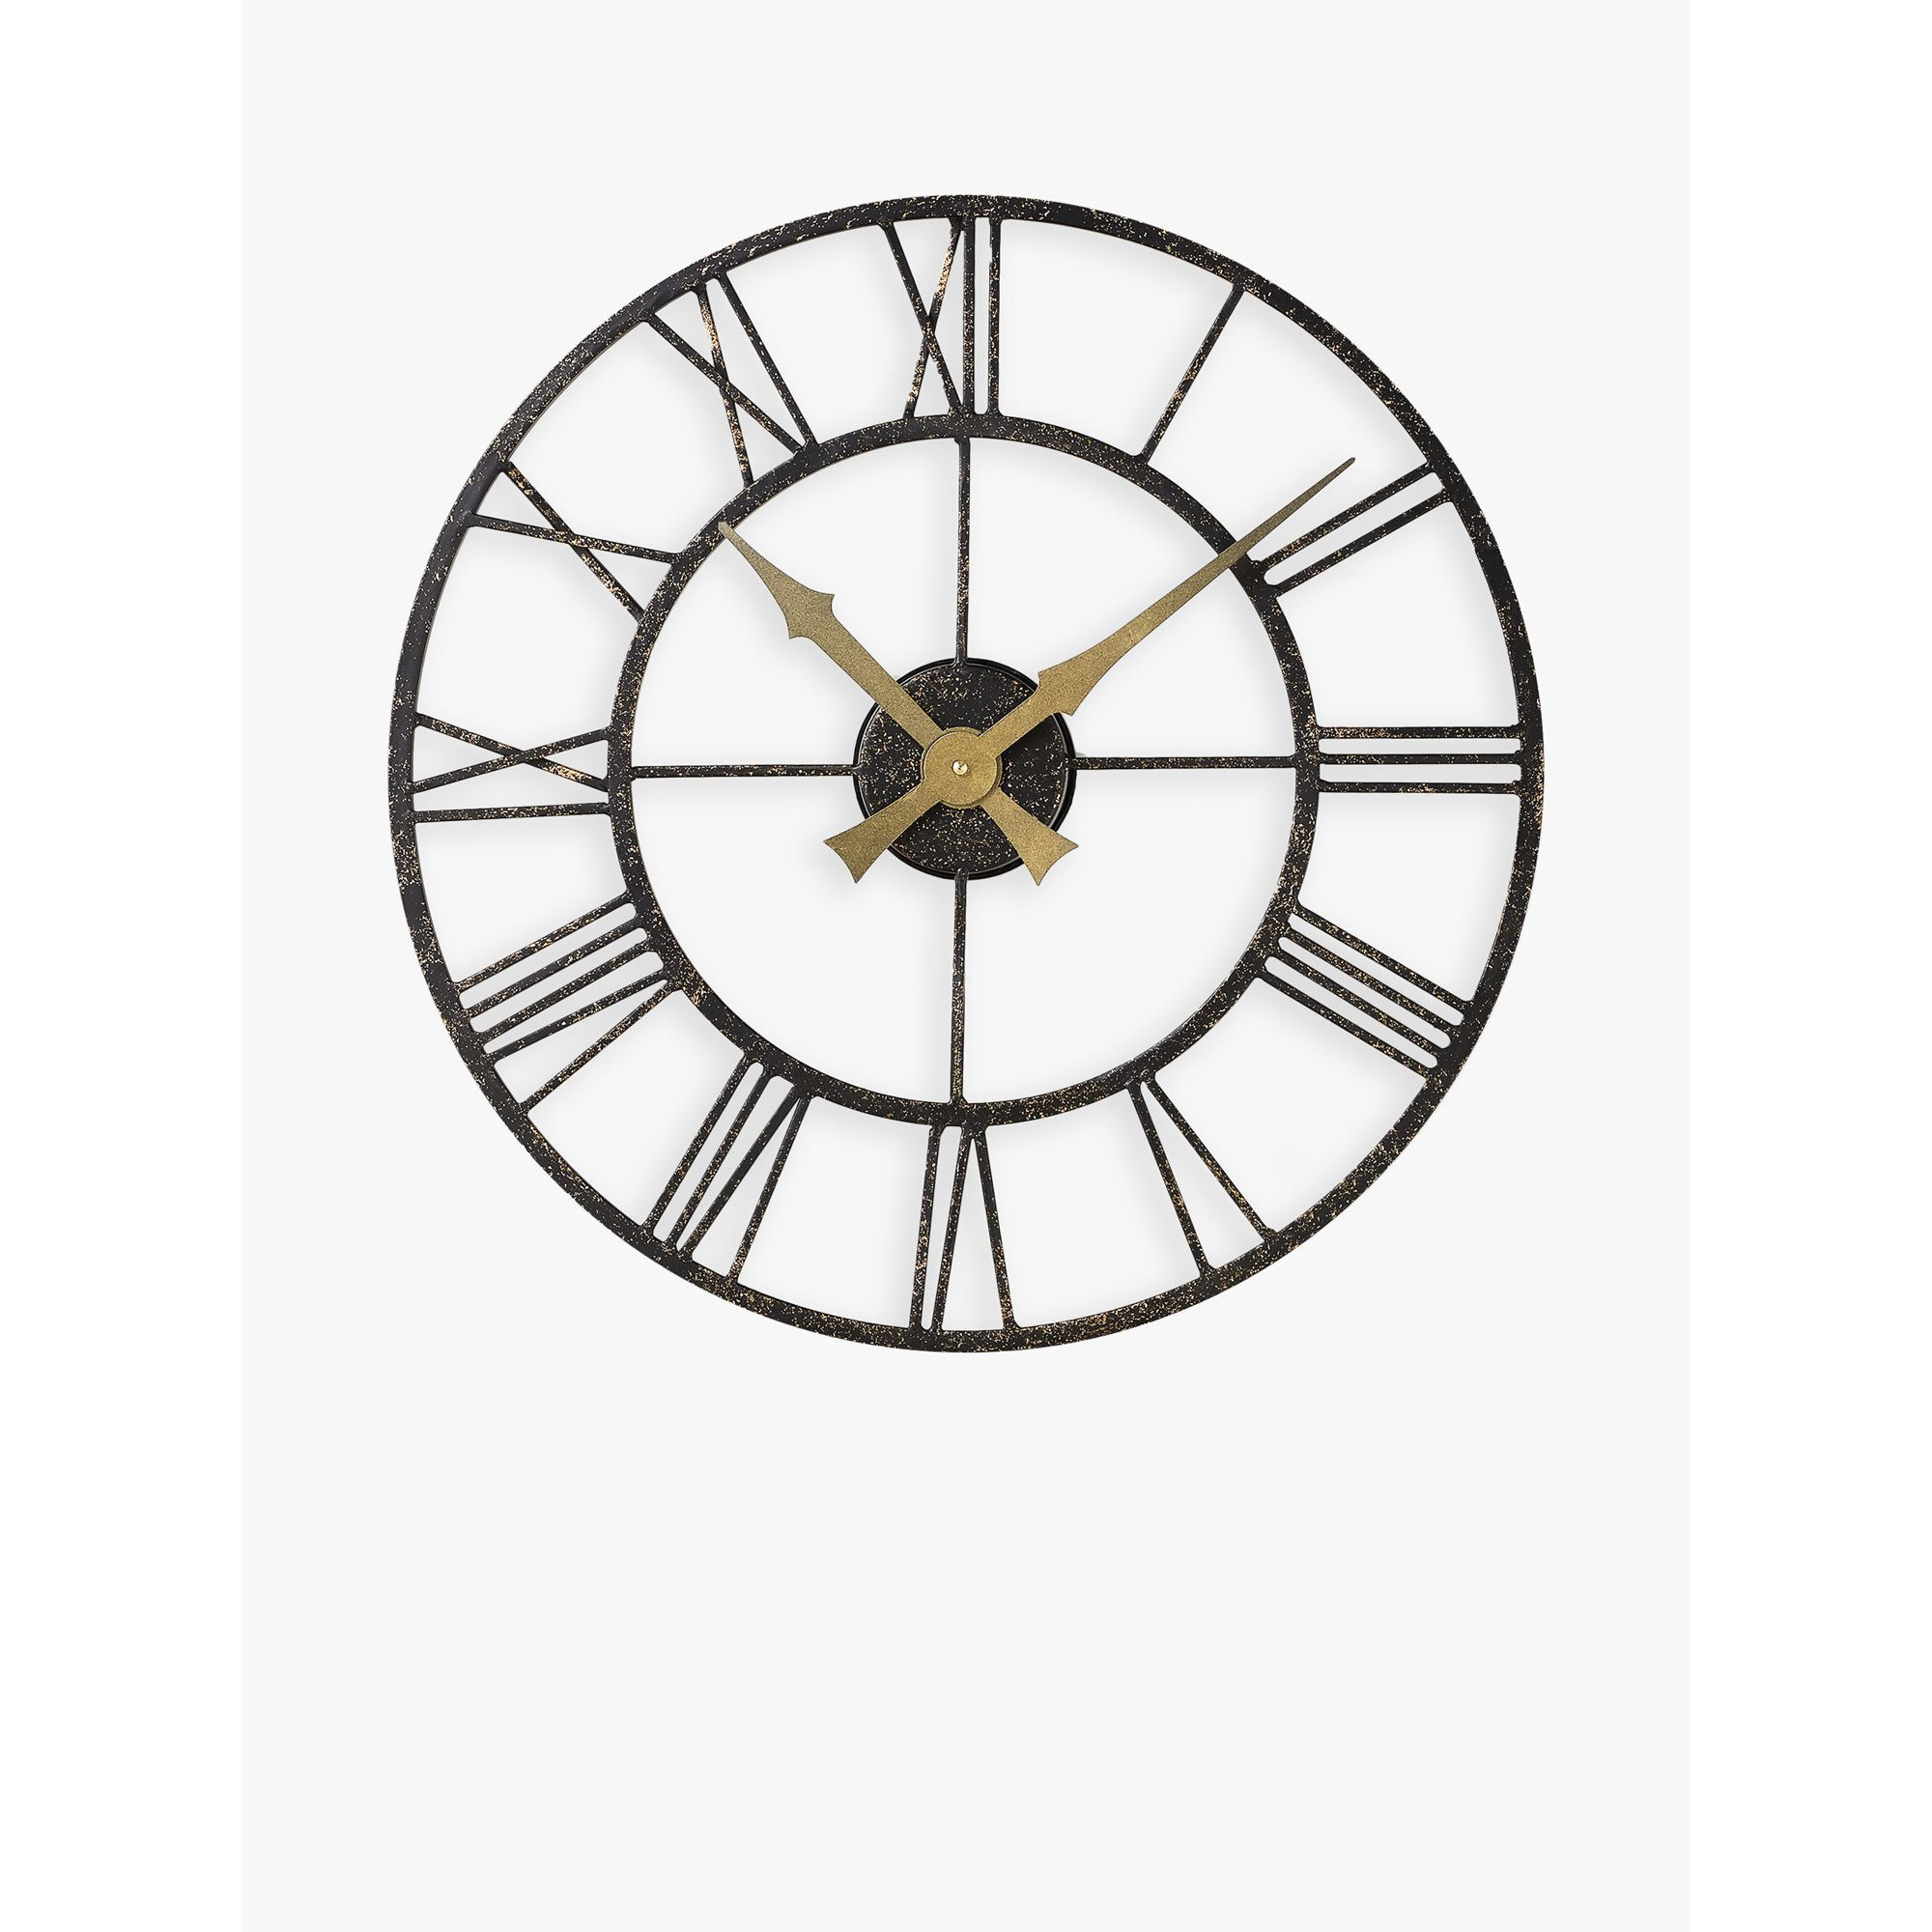 Lascelles Analogue Skeleton Roman Numerals Outdoor Wall Clock, 50cm, Brown - image 1